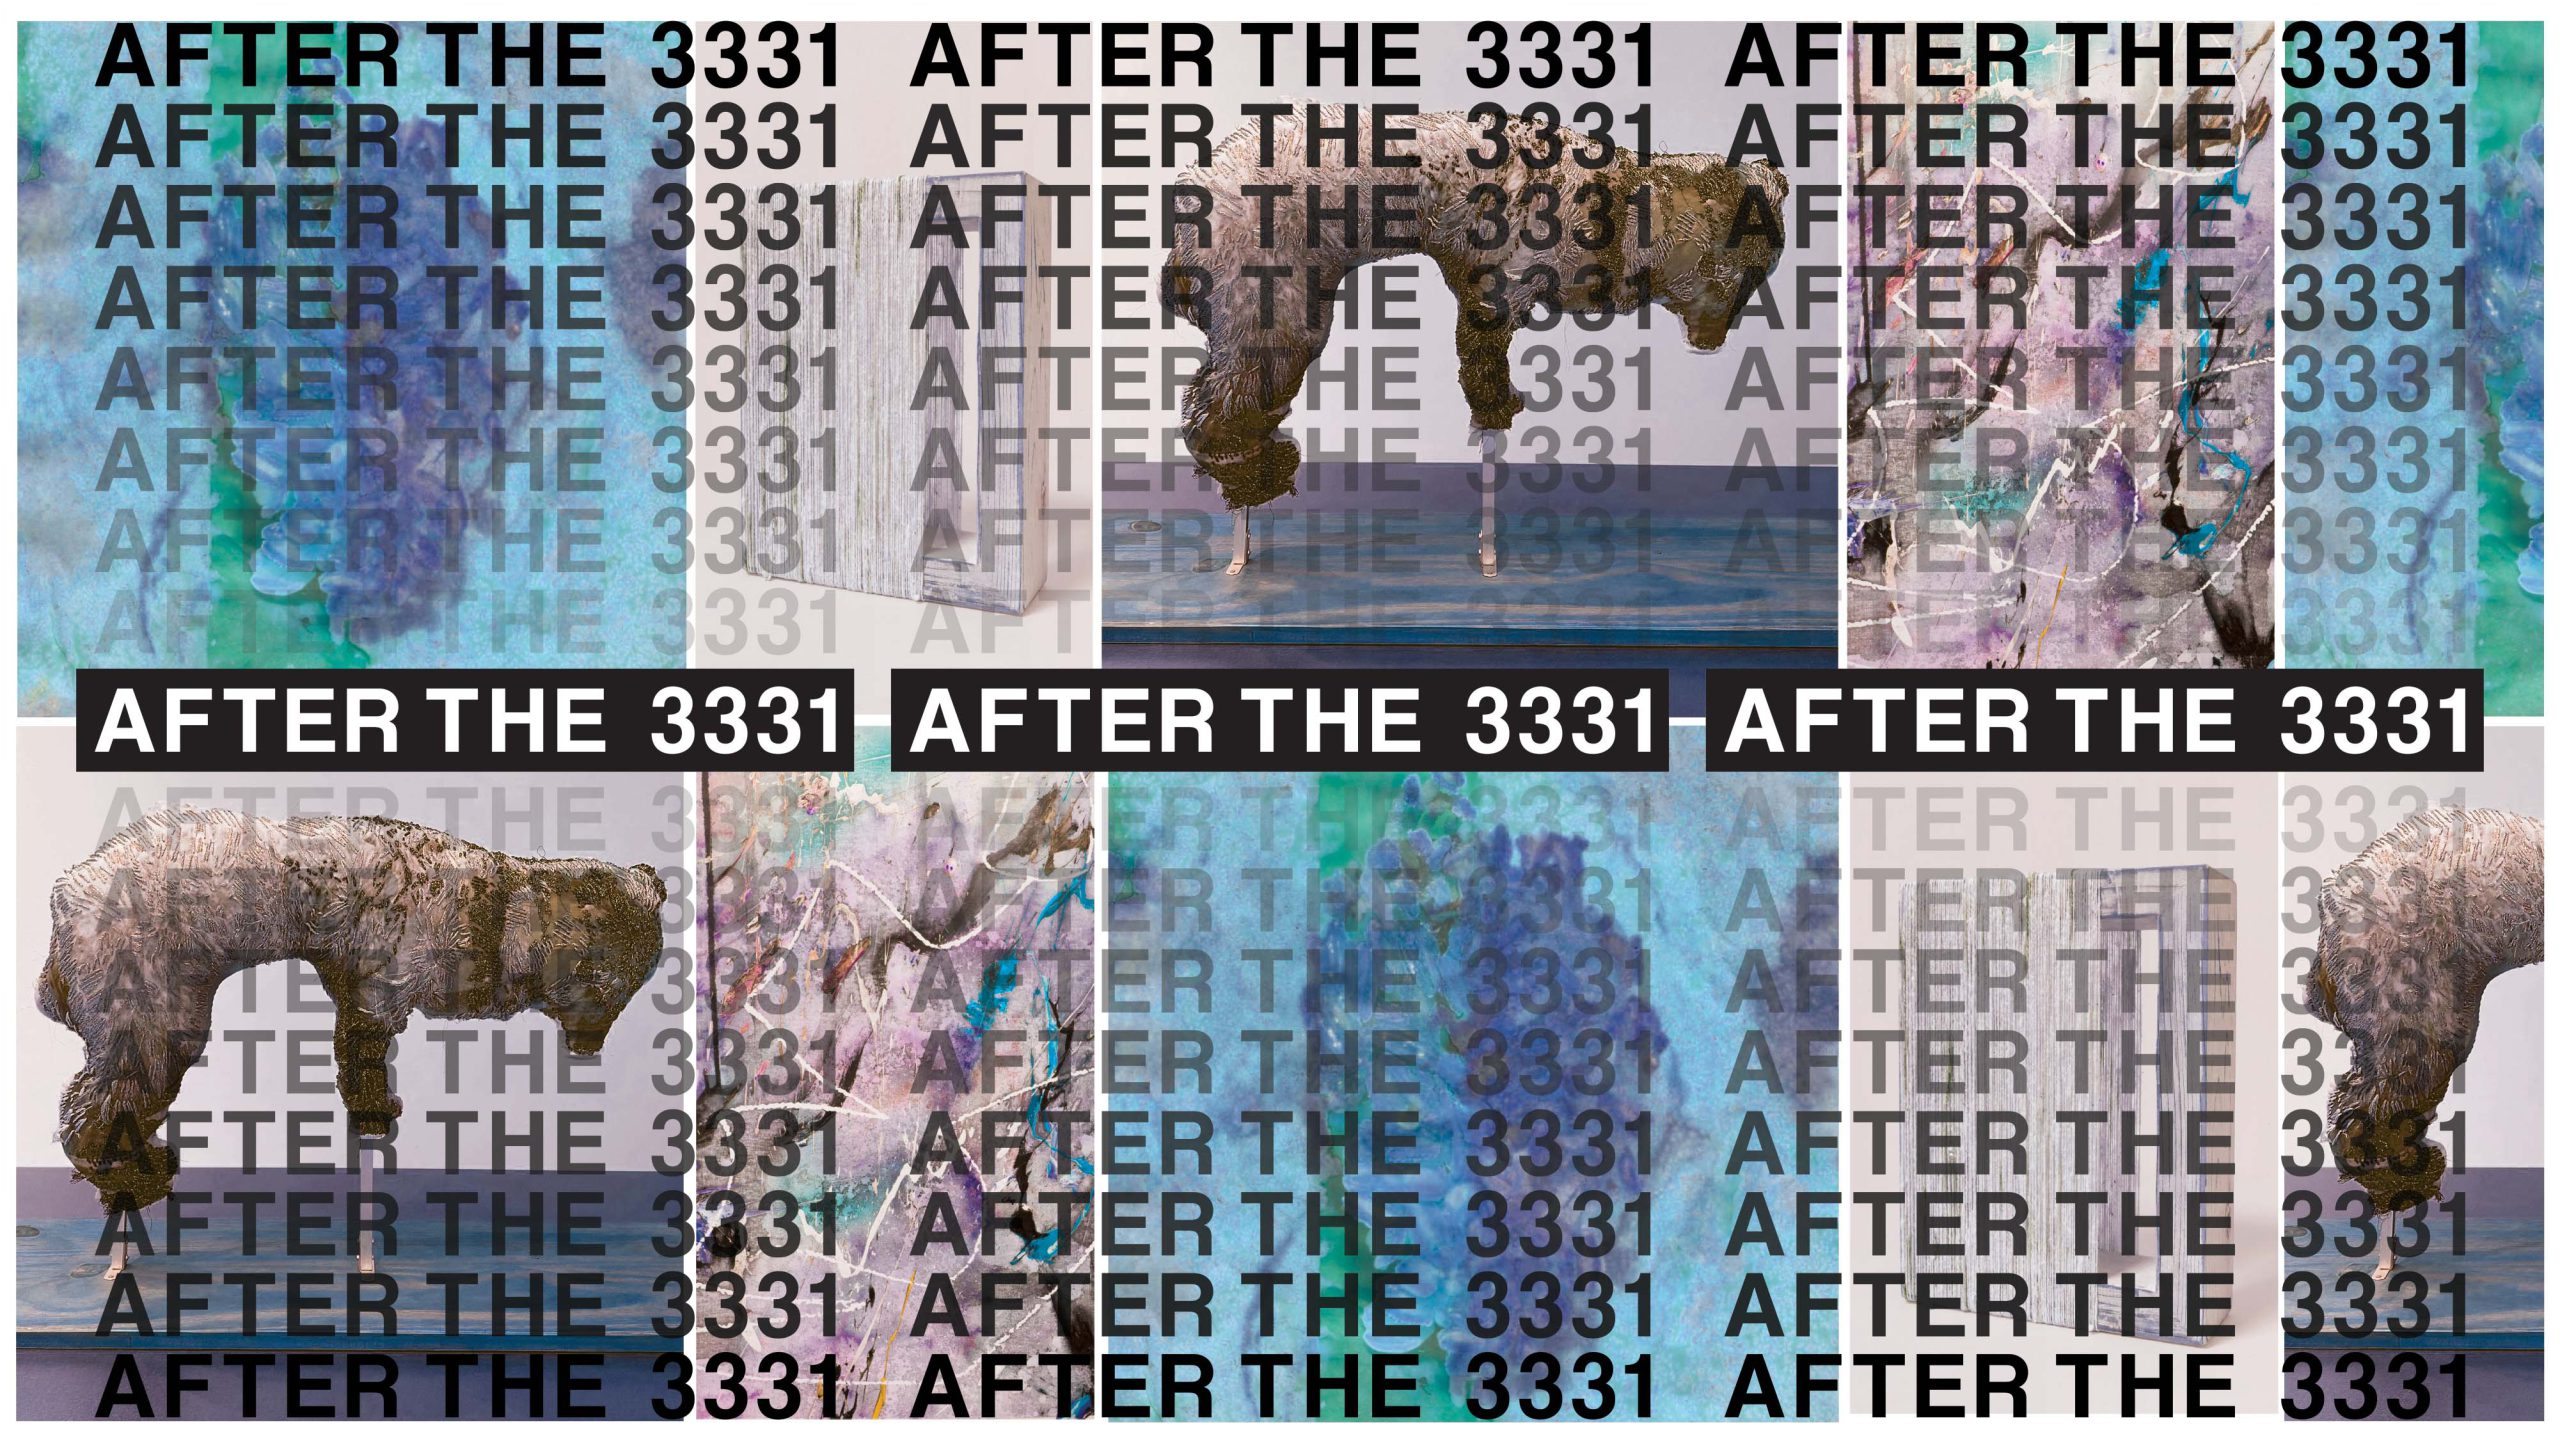 AFTER THE 3331